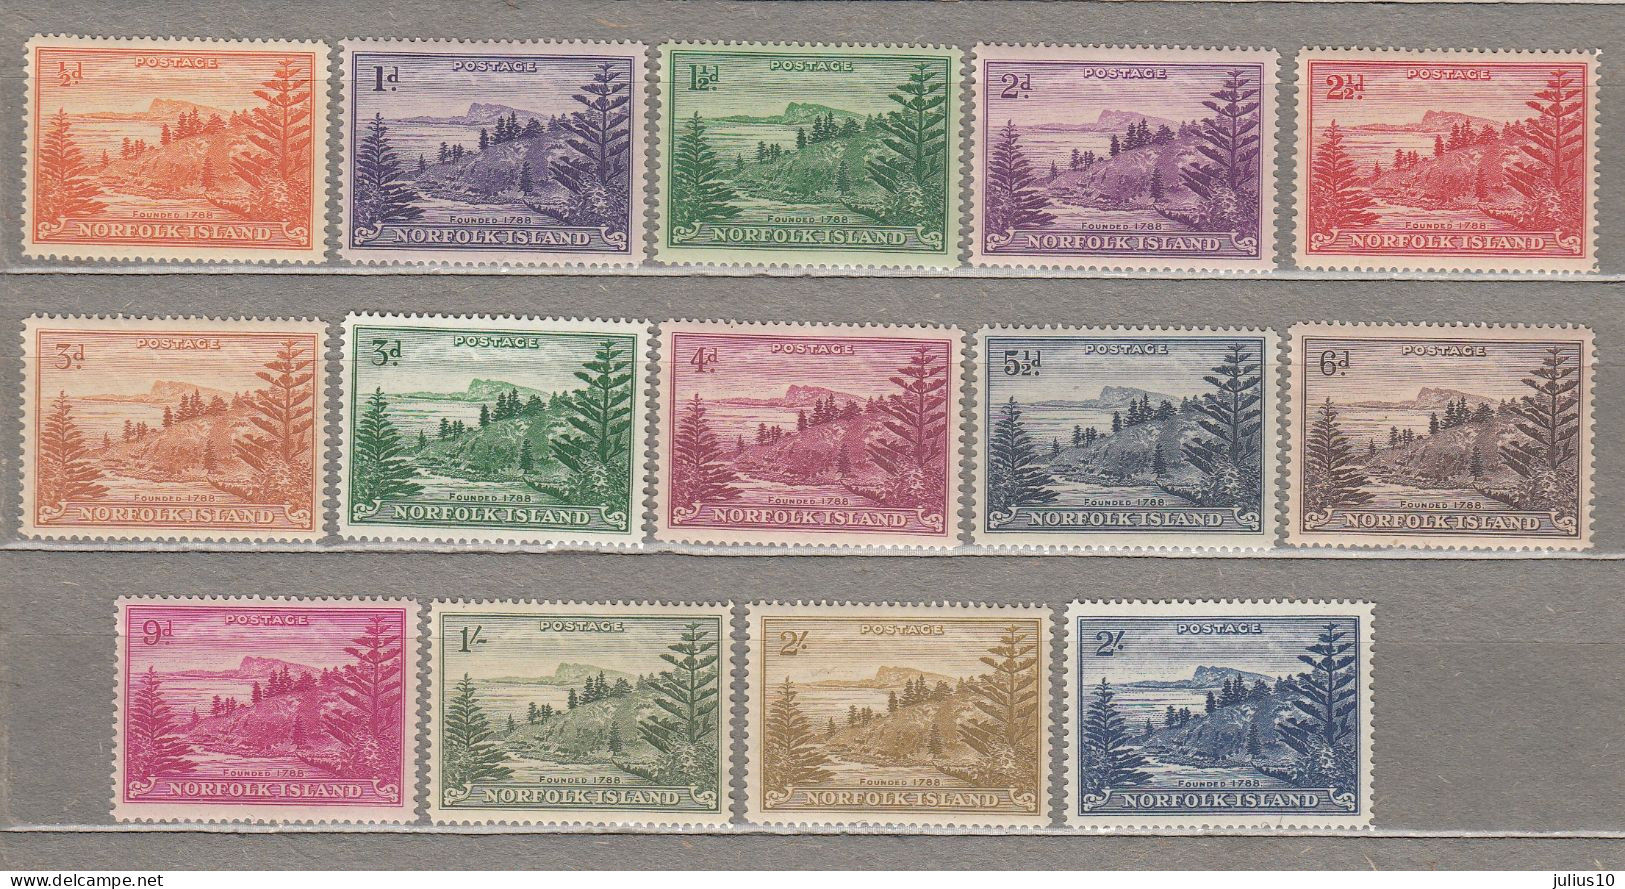 NORFOLK ISLAND 1947 Complete Set Two Stamps White Paper? MVLH (*) Mi 1-14 SG 1-12a Look Scan #23181 - Norfolk Island